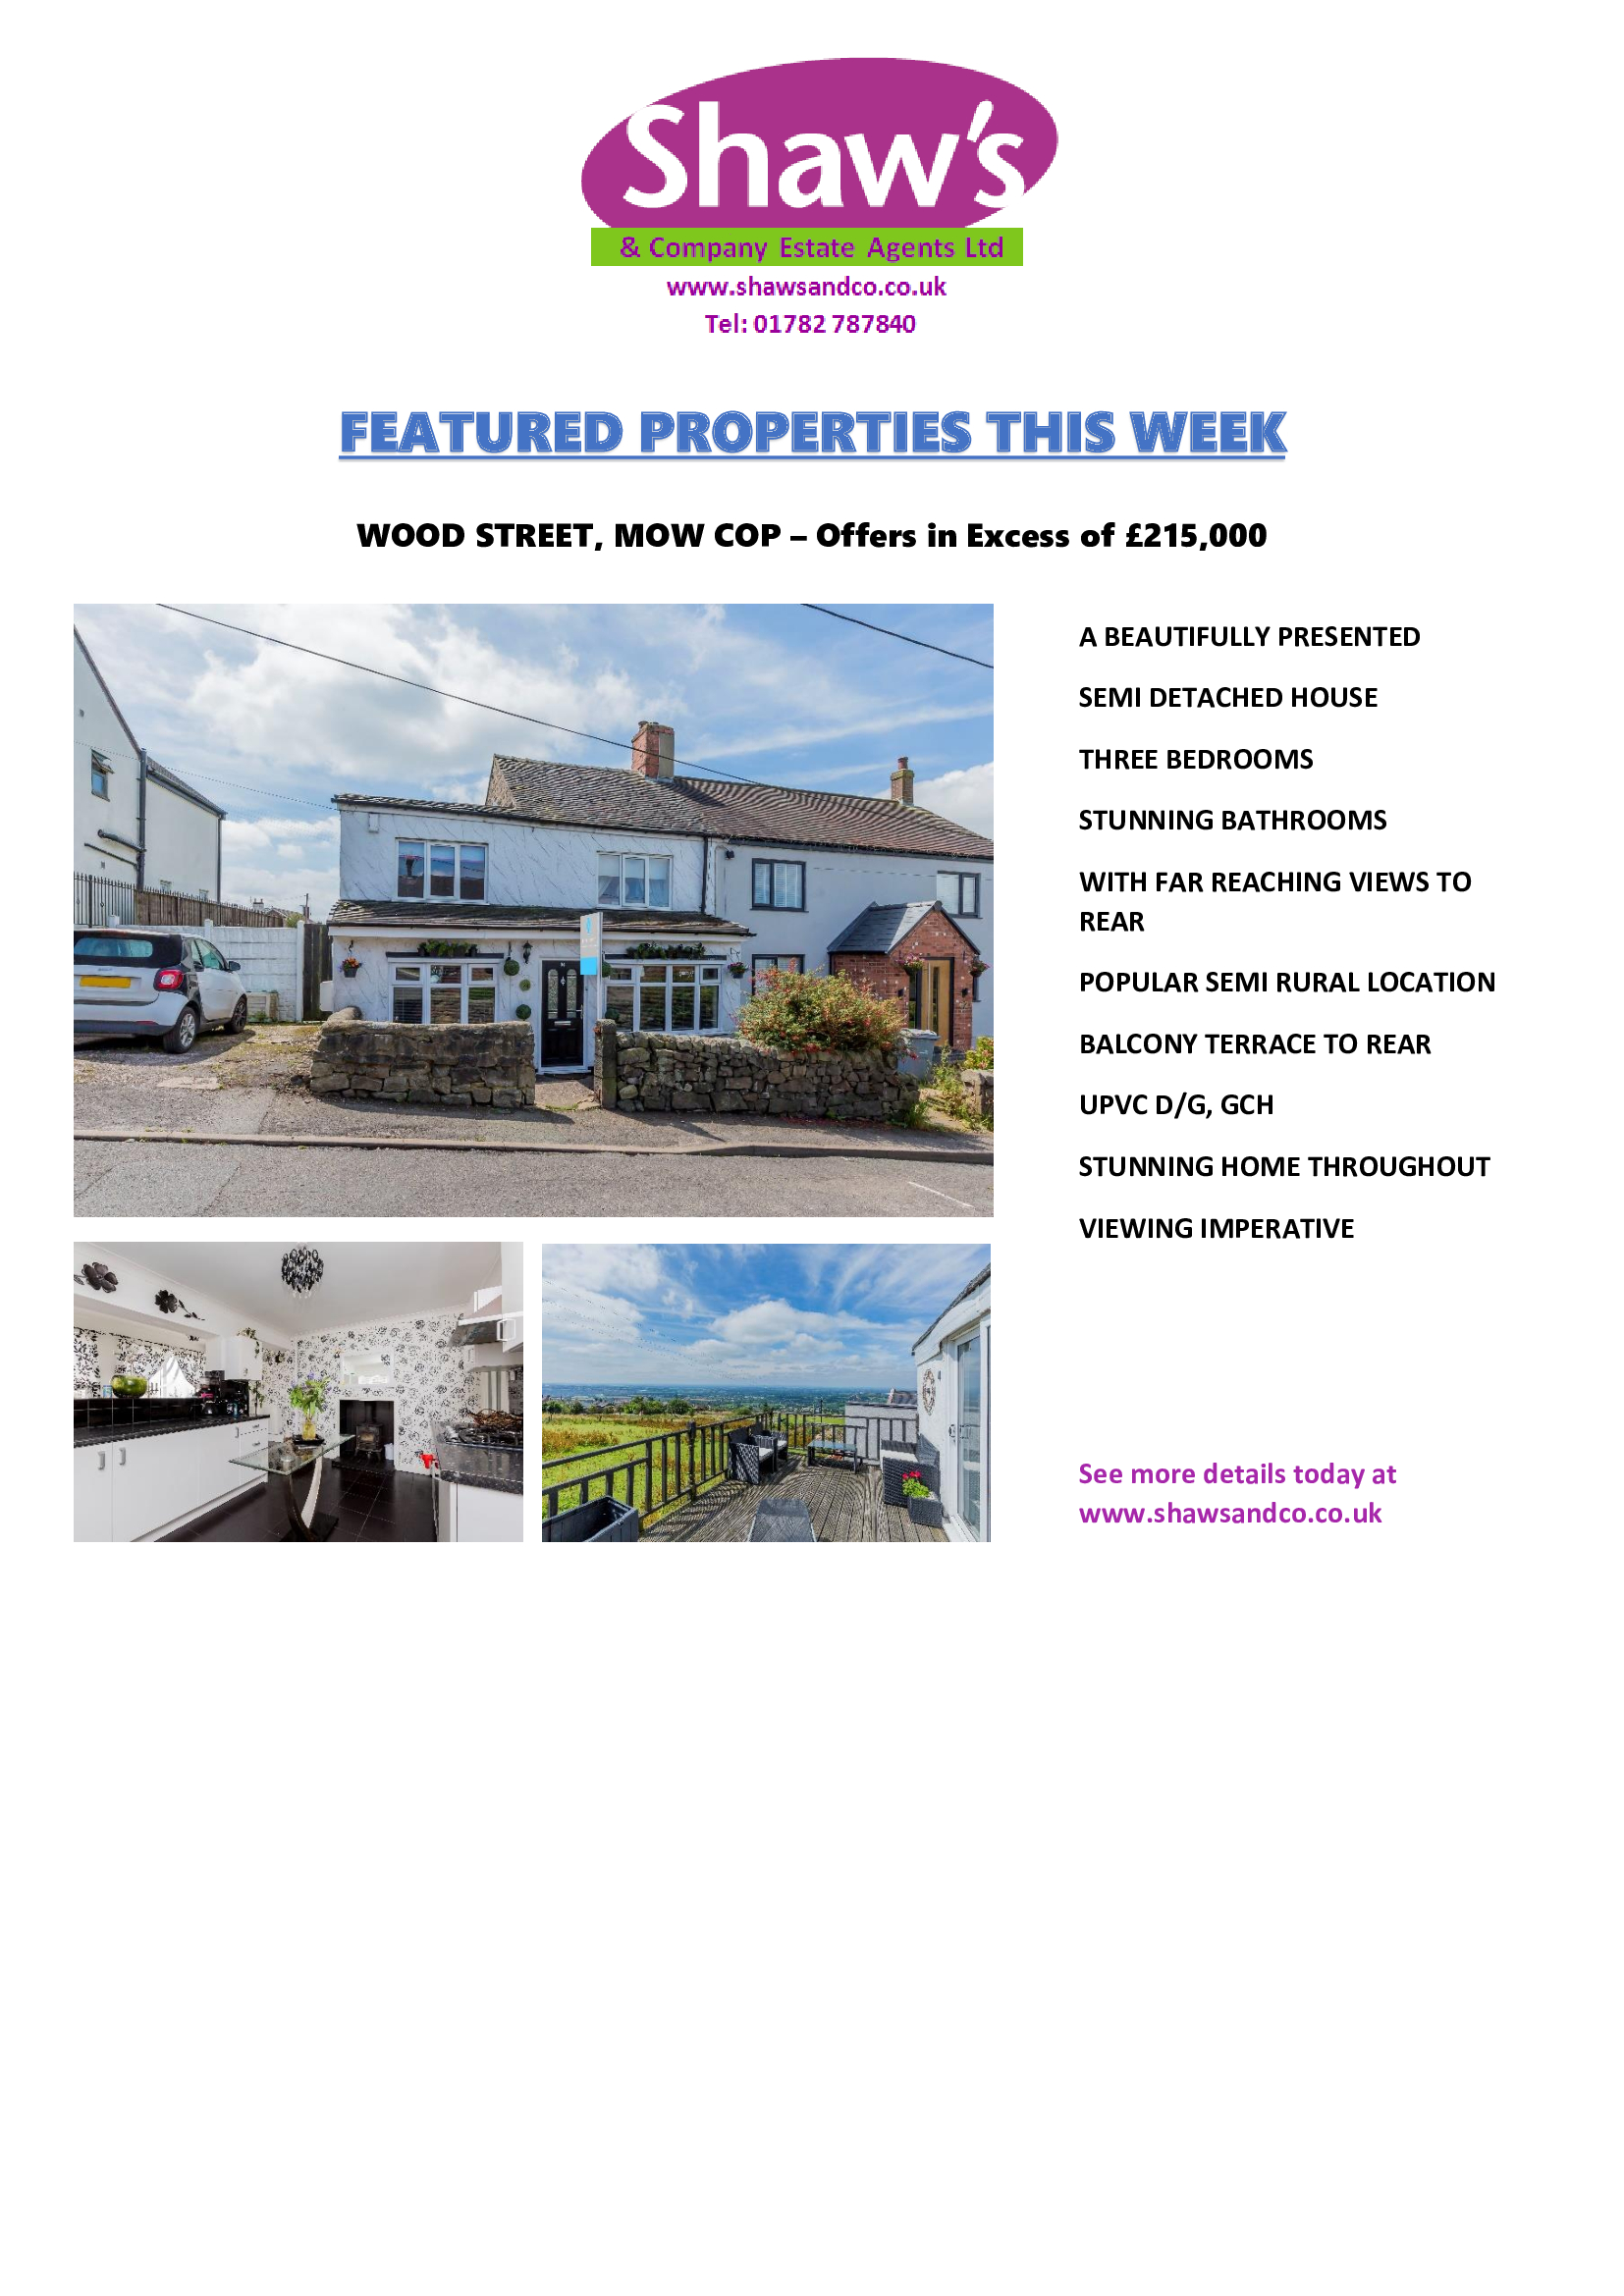 SHAW'S & CO - FEATURED PROPERTIES THIS WEEK